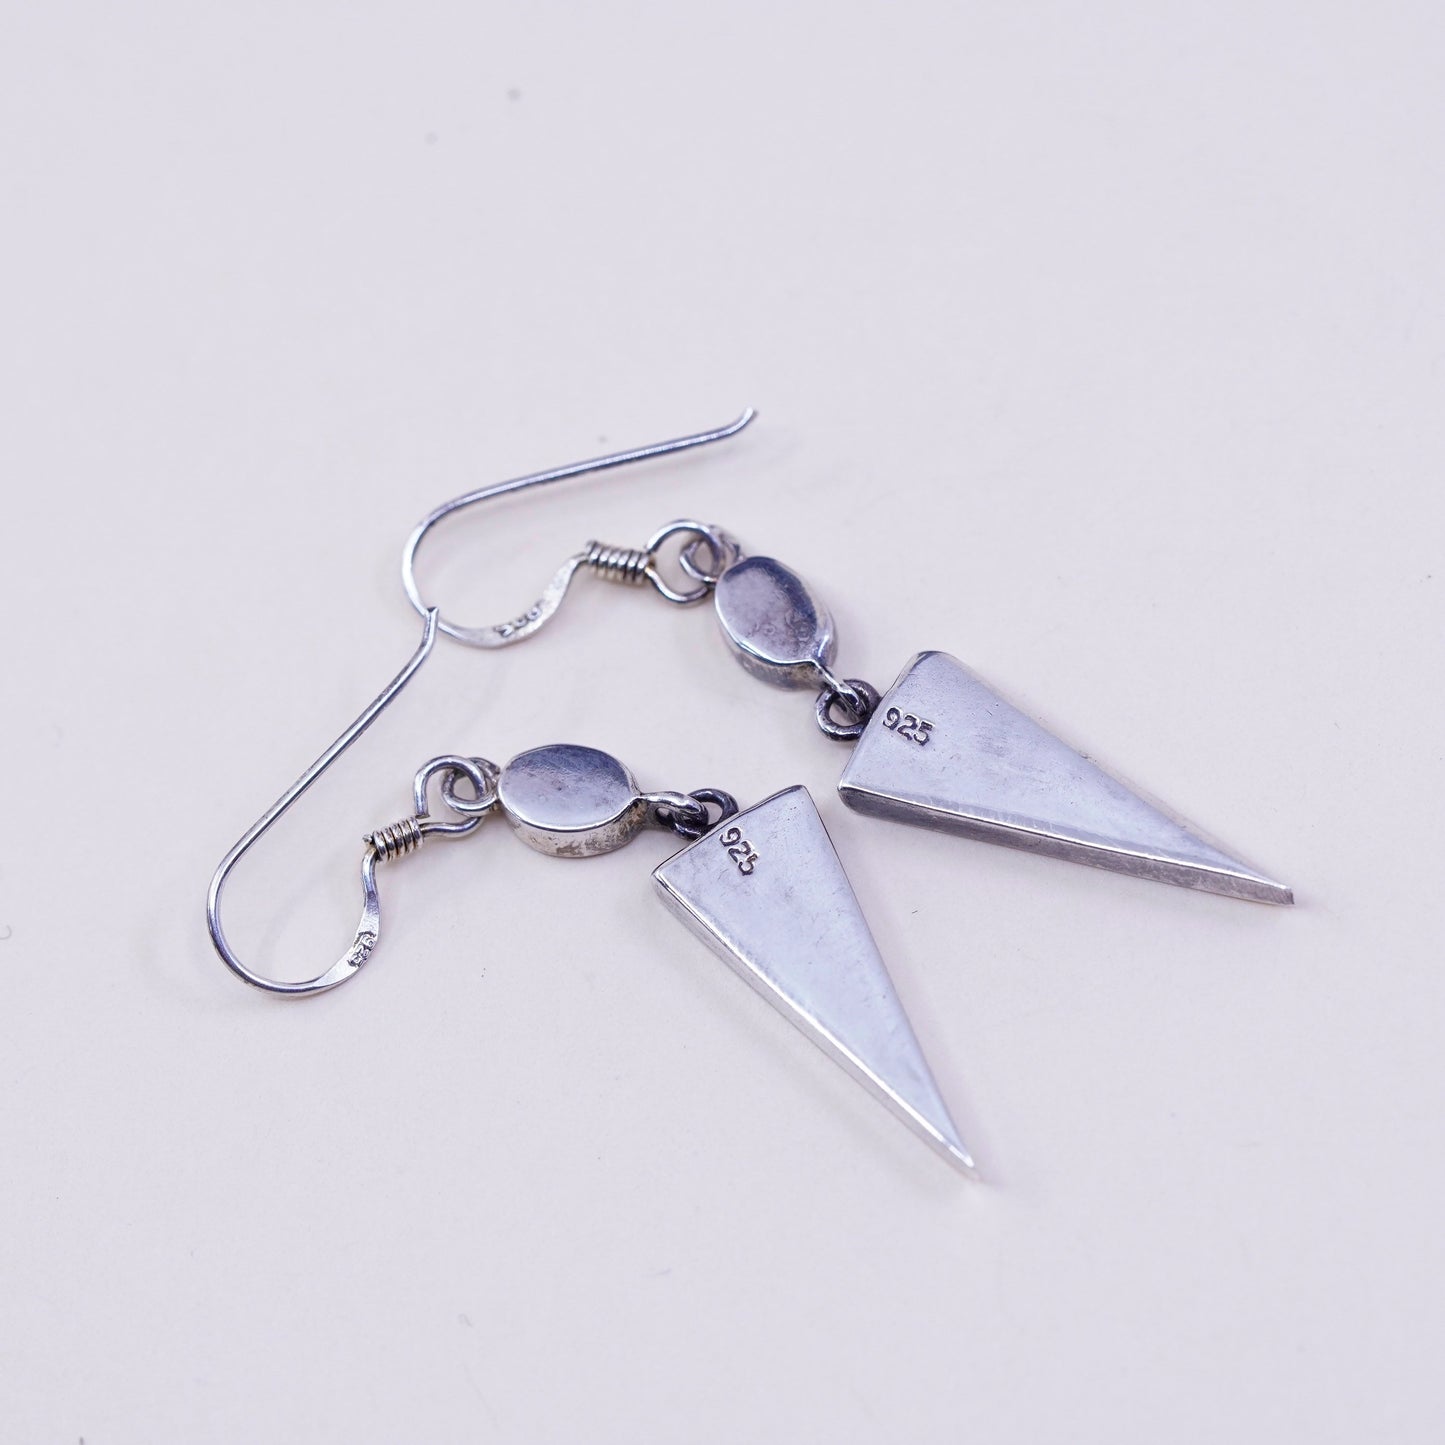 Vintage sterling 925 silver handmade earrings with triangular blue mother of pearl drop, stamped 925